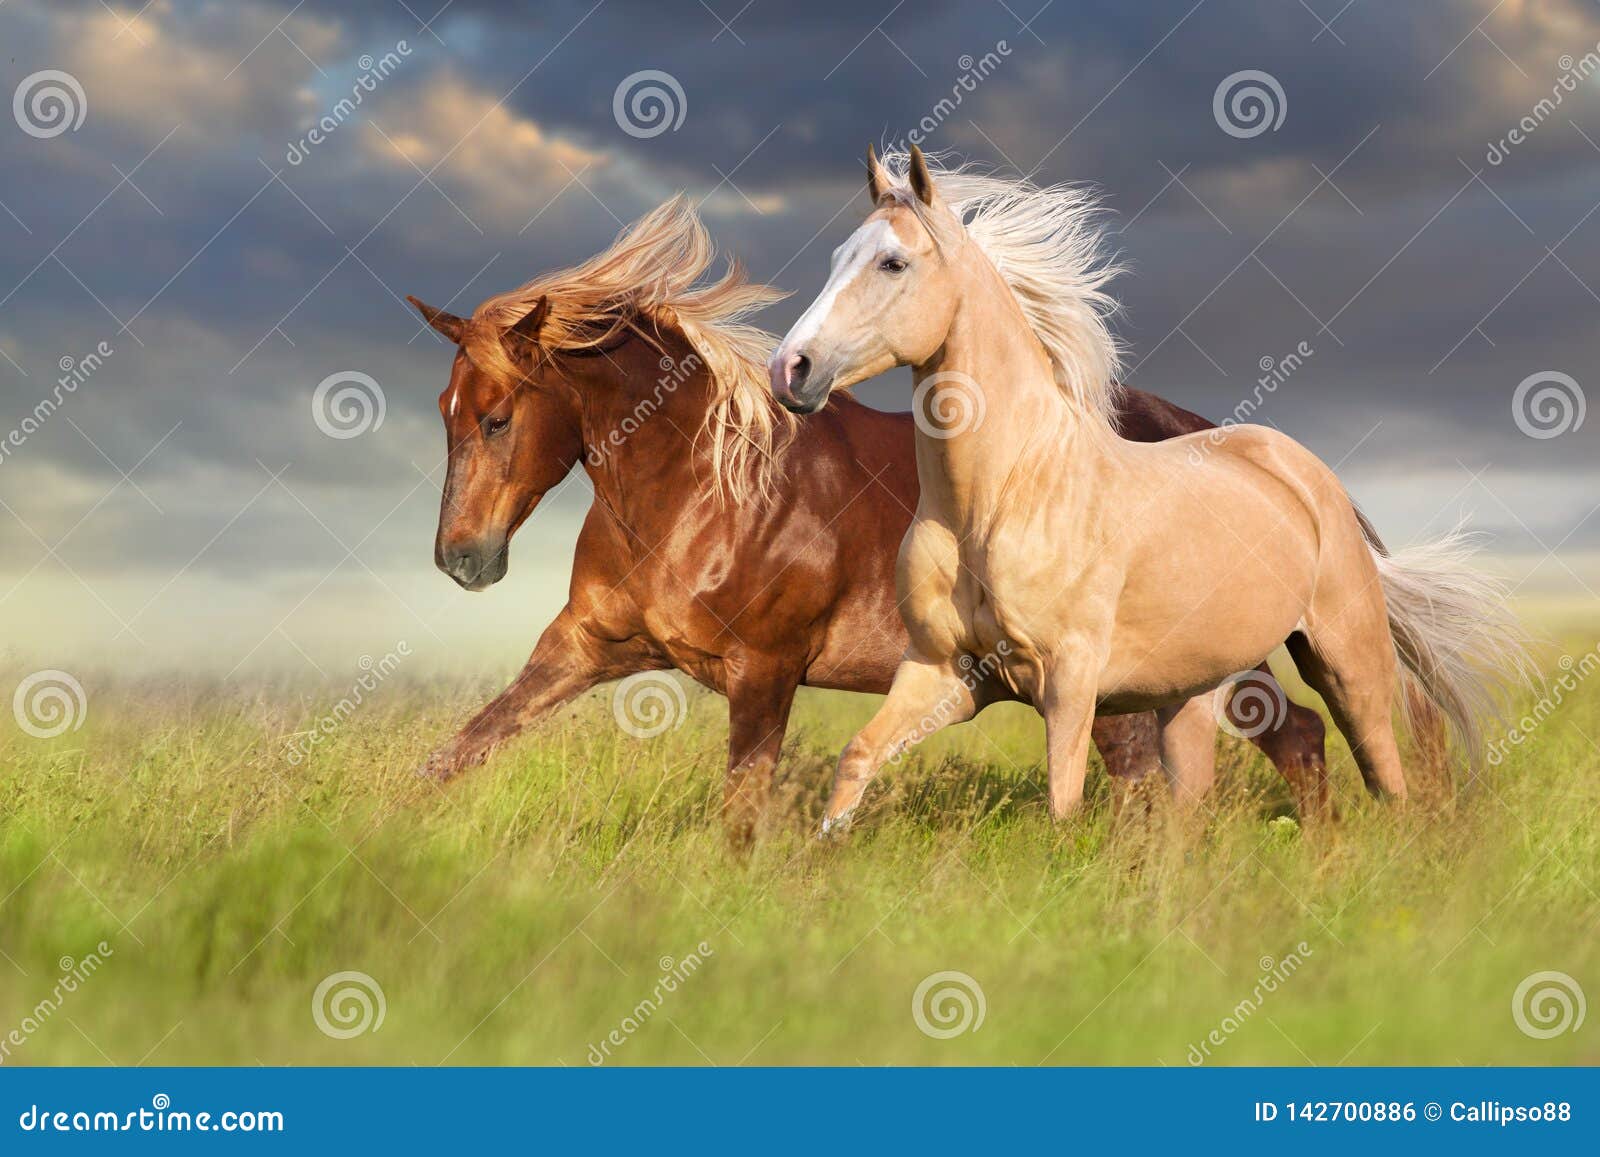 red and palomino horse